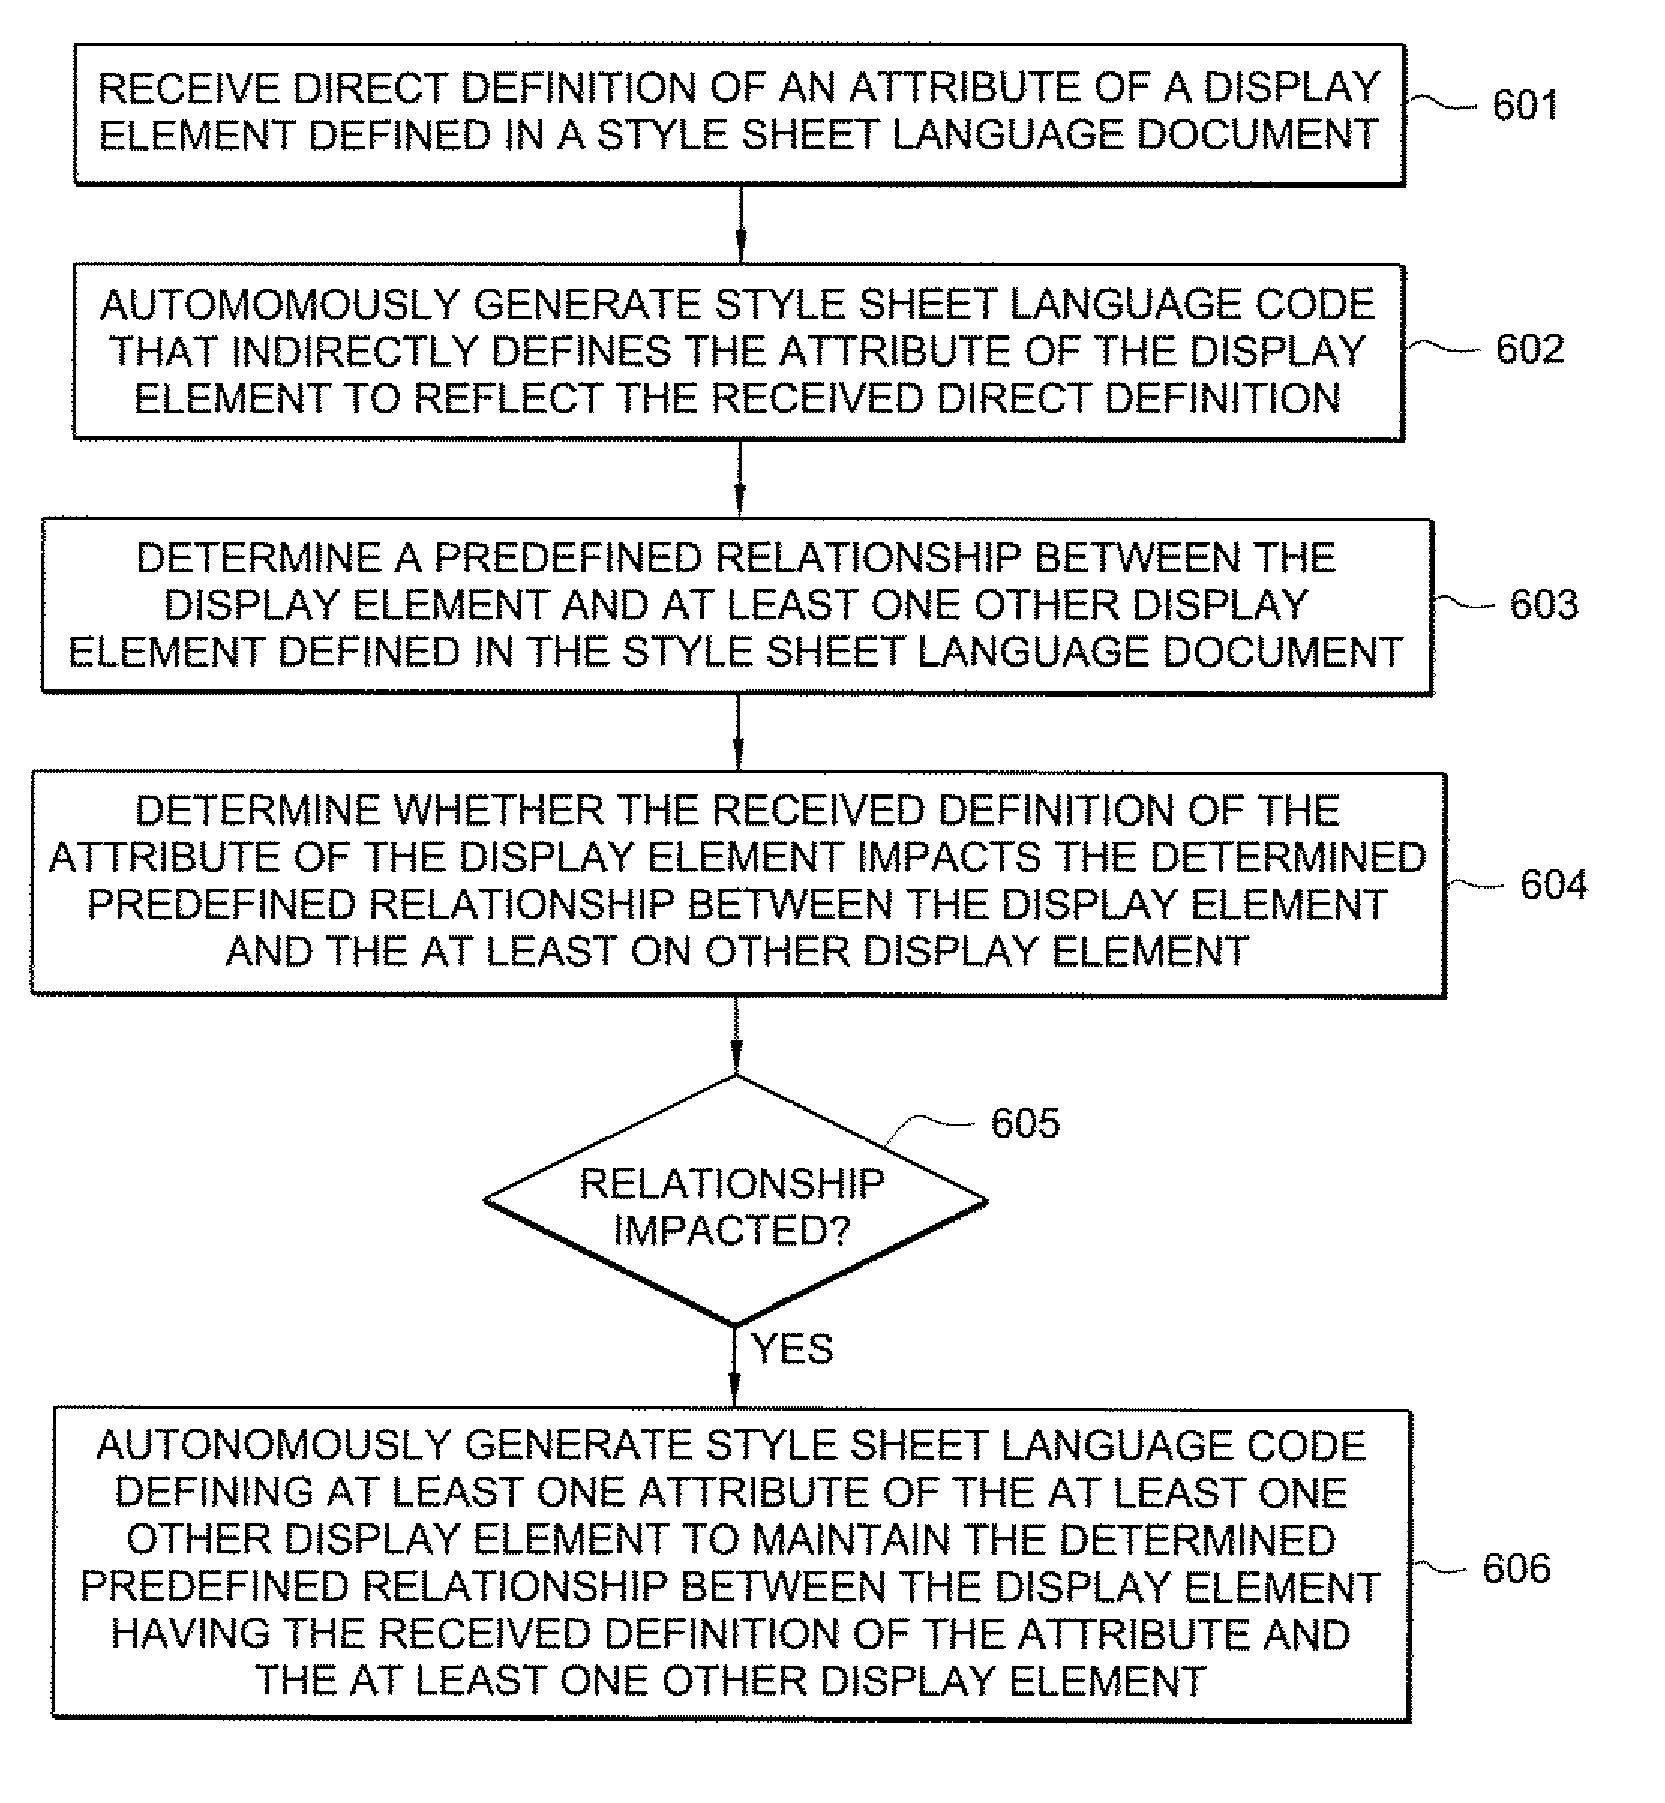 System and method for style sheet language coding that maintains a desired relationship between display elements